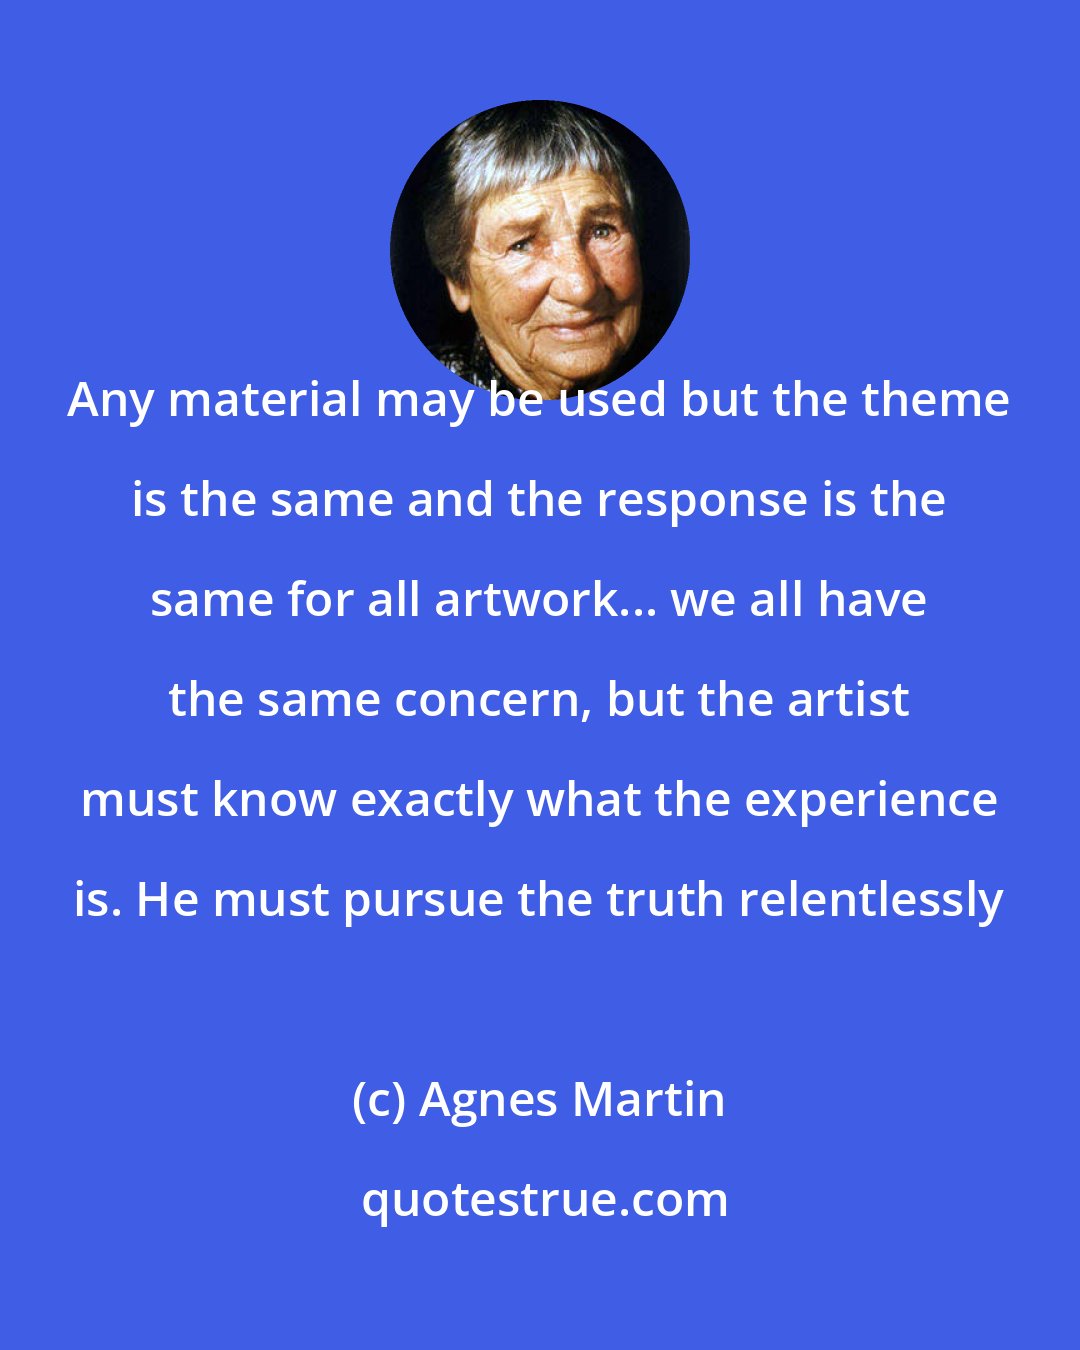 Agnes Martin: Any material may be used but the theme is the same and the response is the same for all artwork... we all have the same concern, but the artist must know exactly what the experience is. He must pursue the truth relentlessly